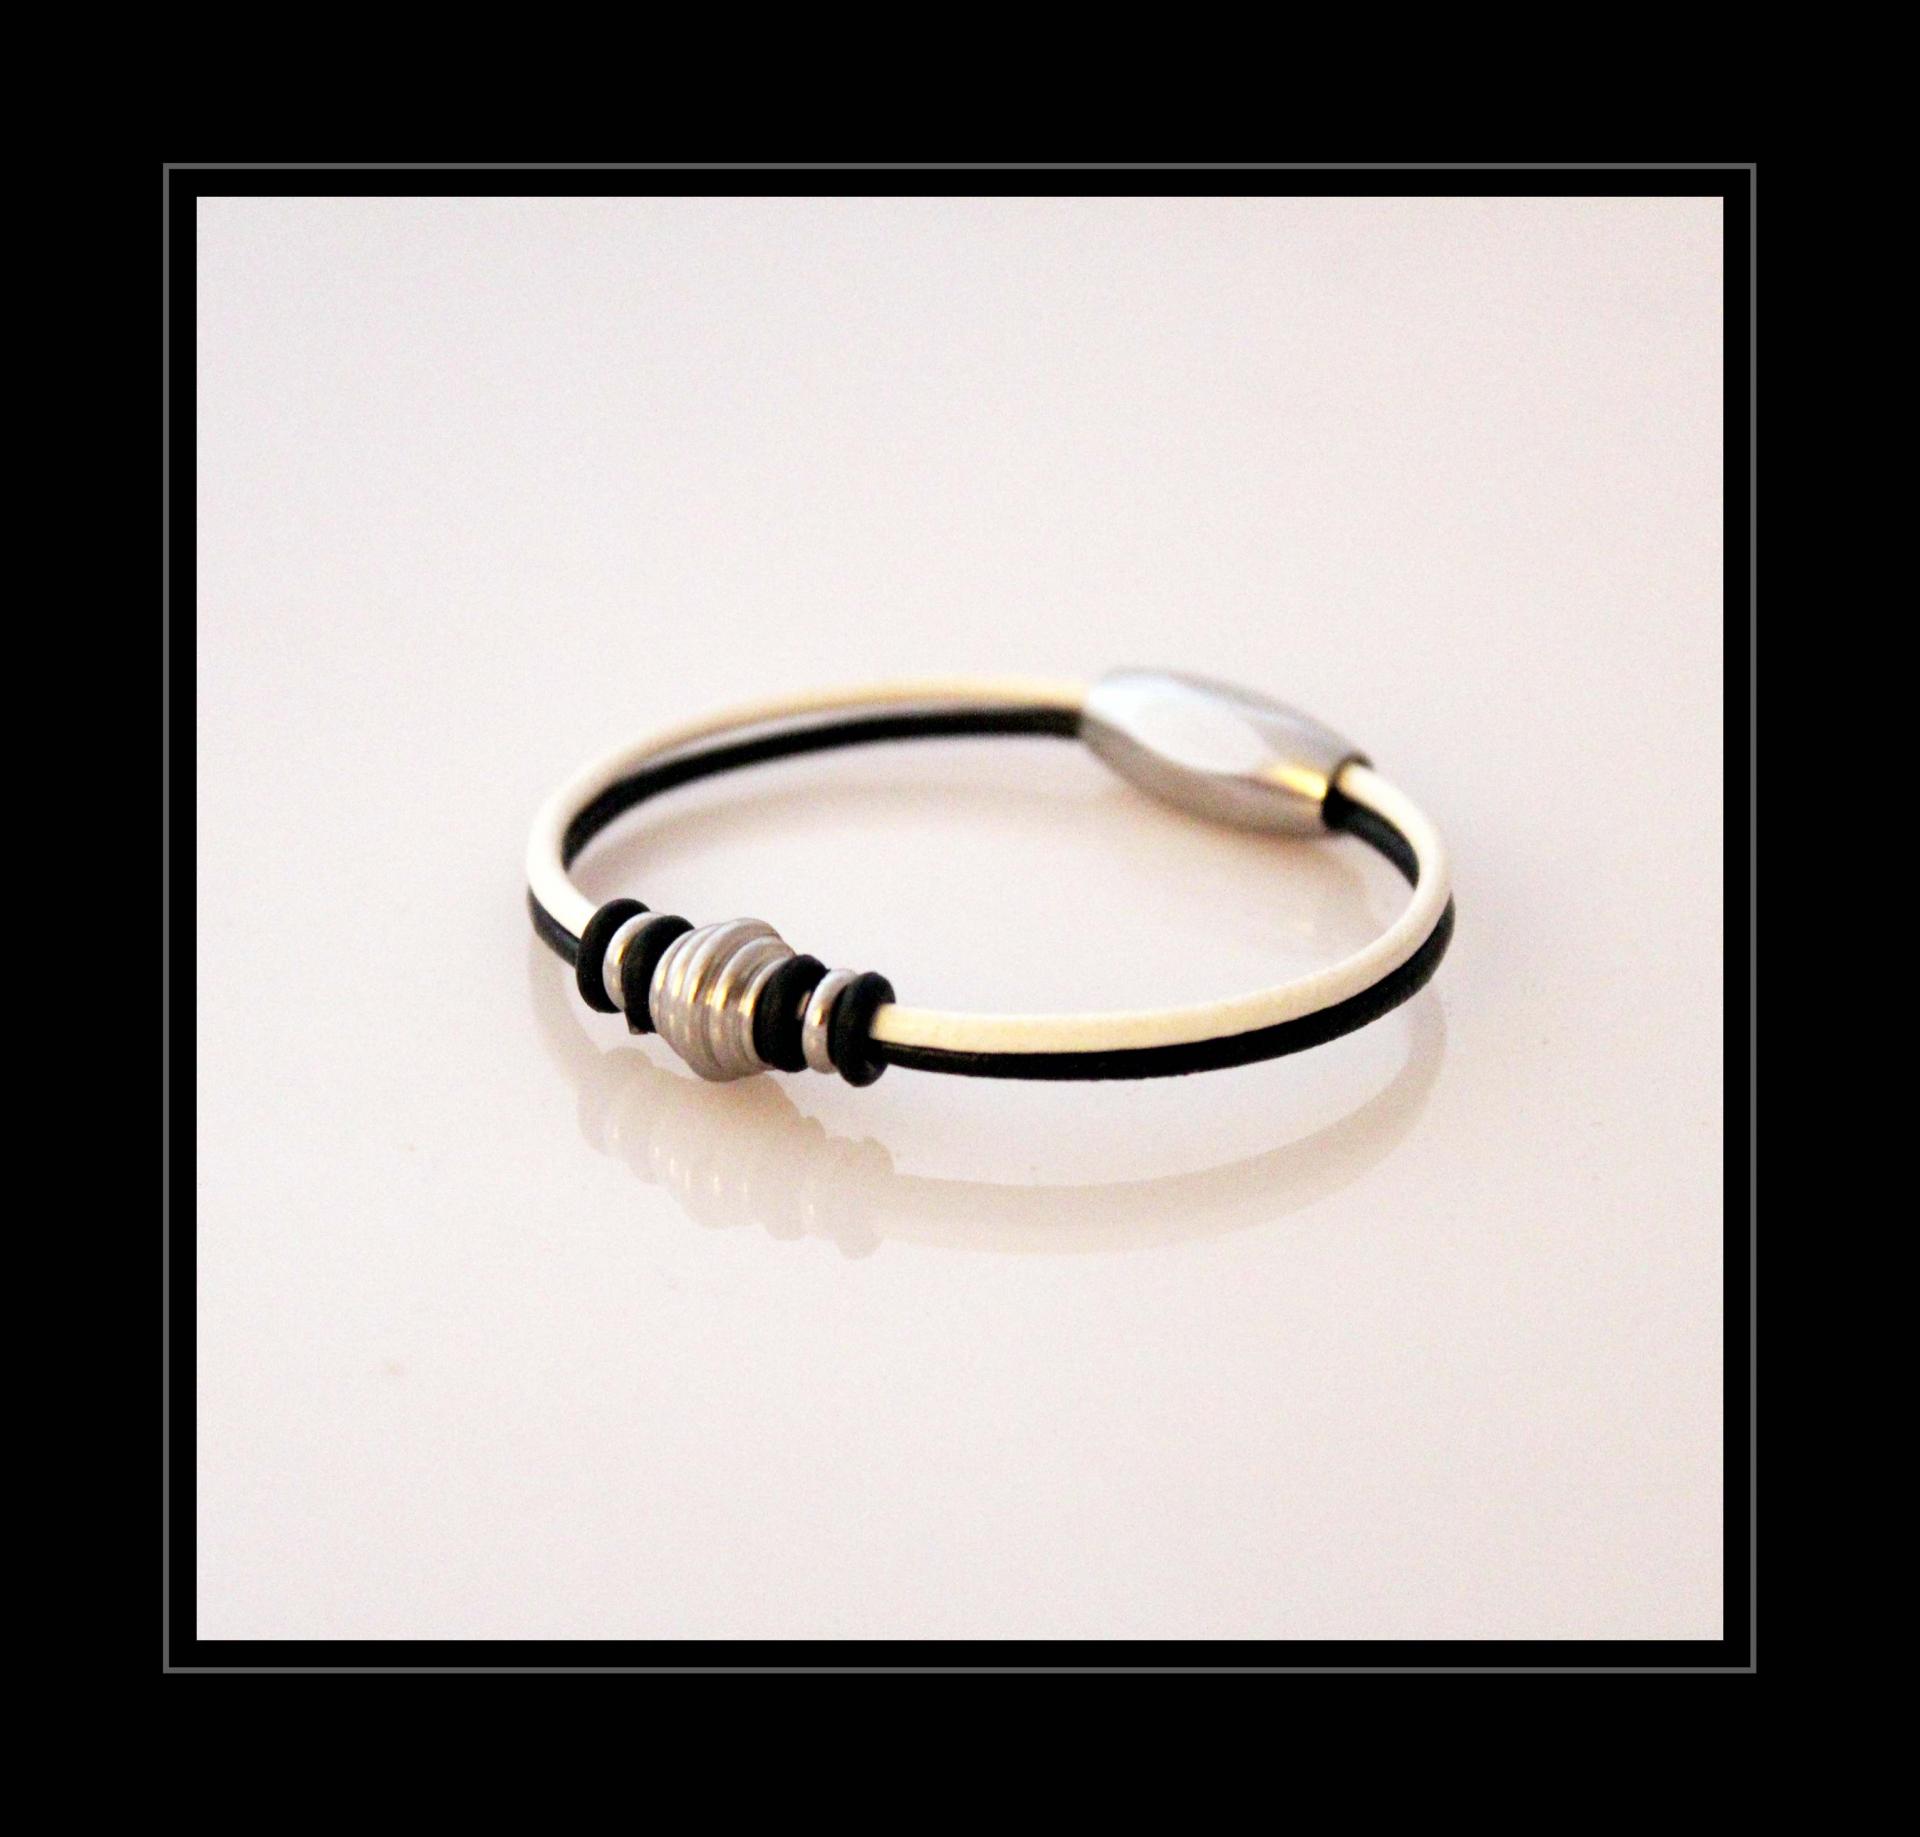 Black and White Leather & Stainless Steel Bracelet